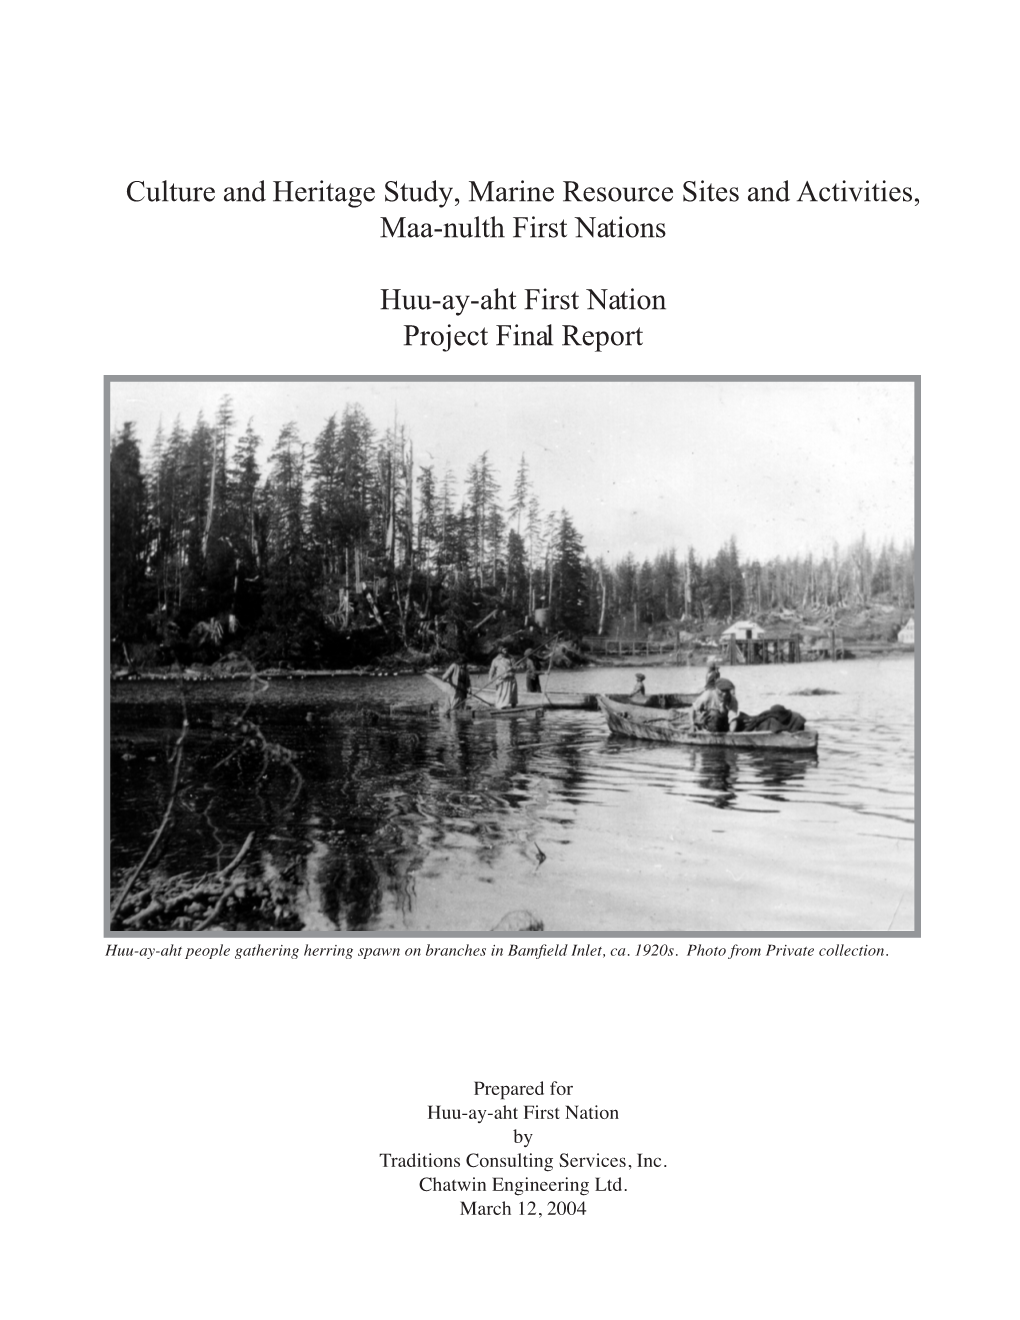 Culture and Heritage Study, Marine Resource Sites and Activities, Maa-Nulth First Nations